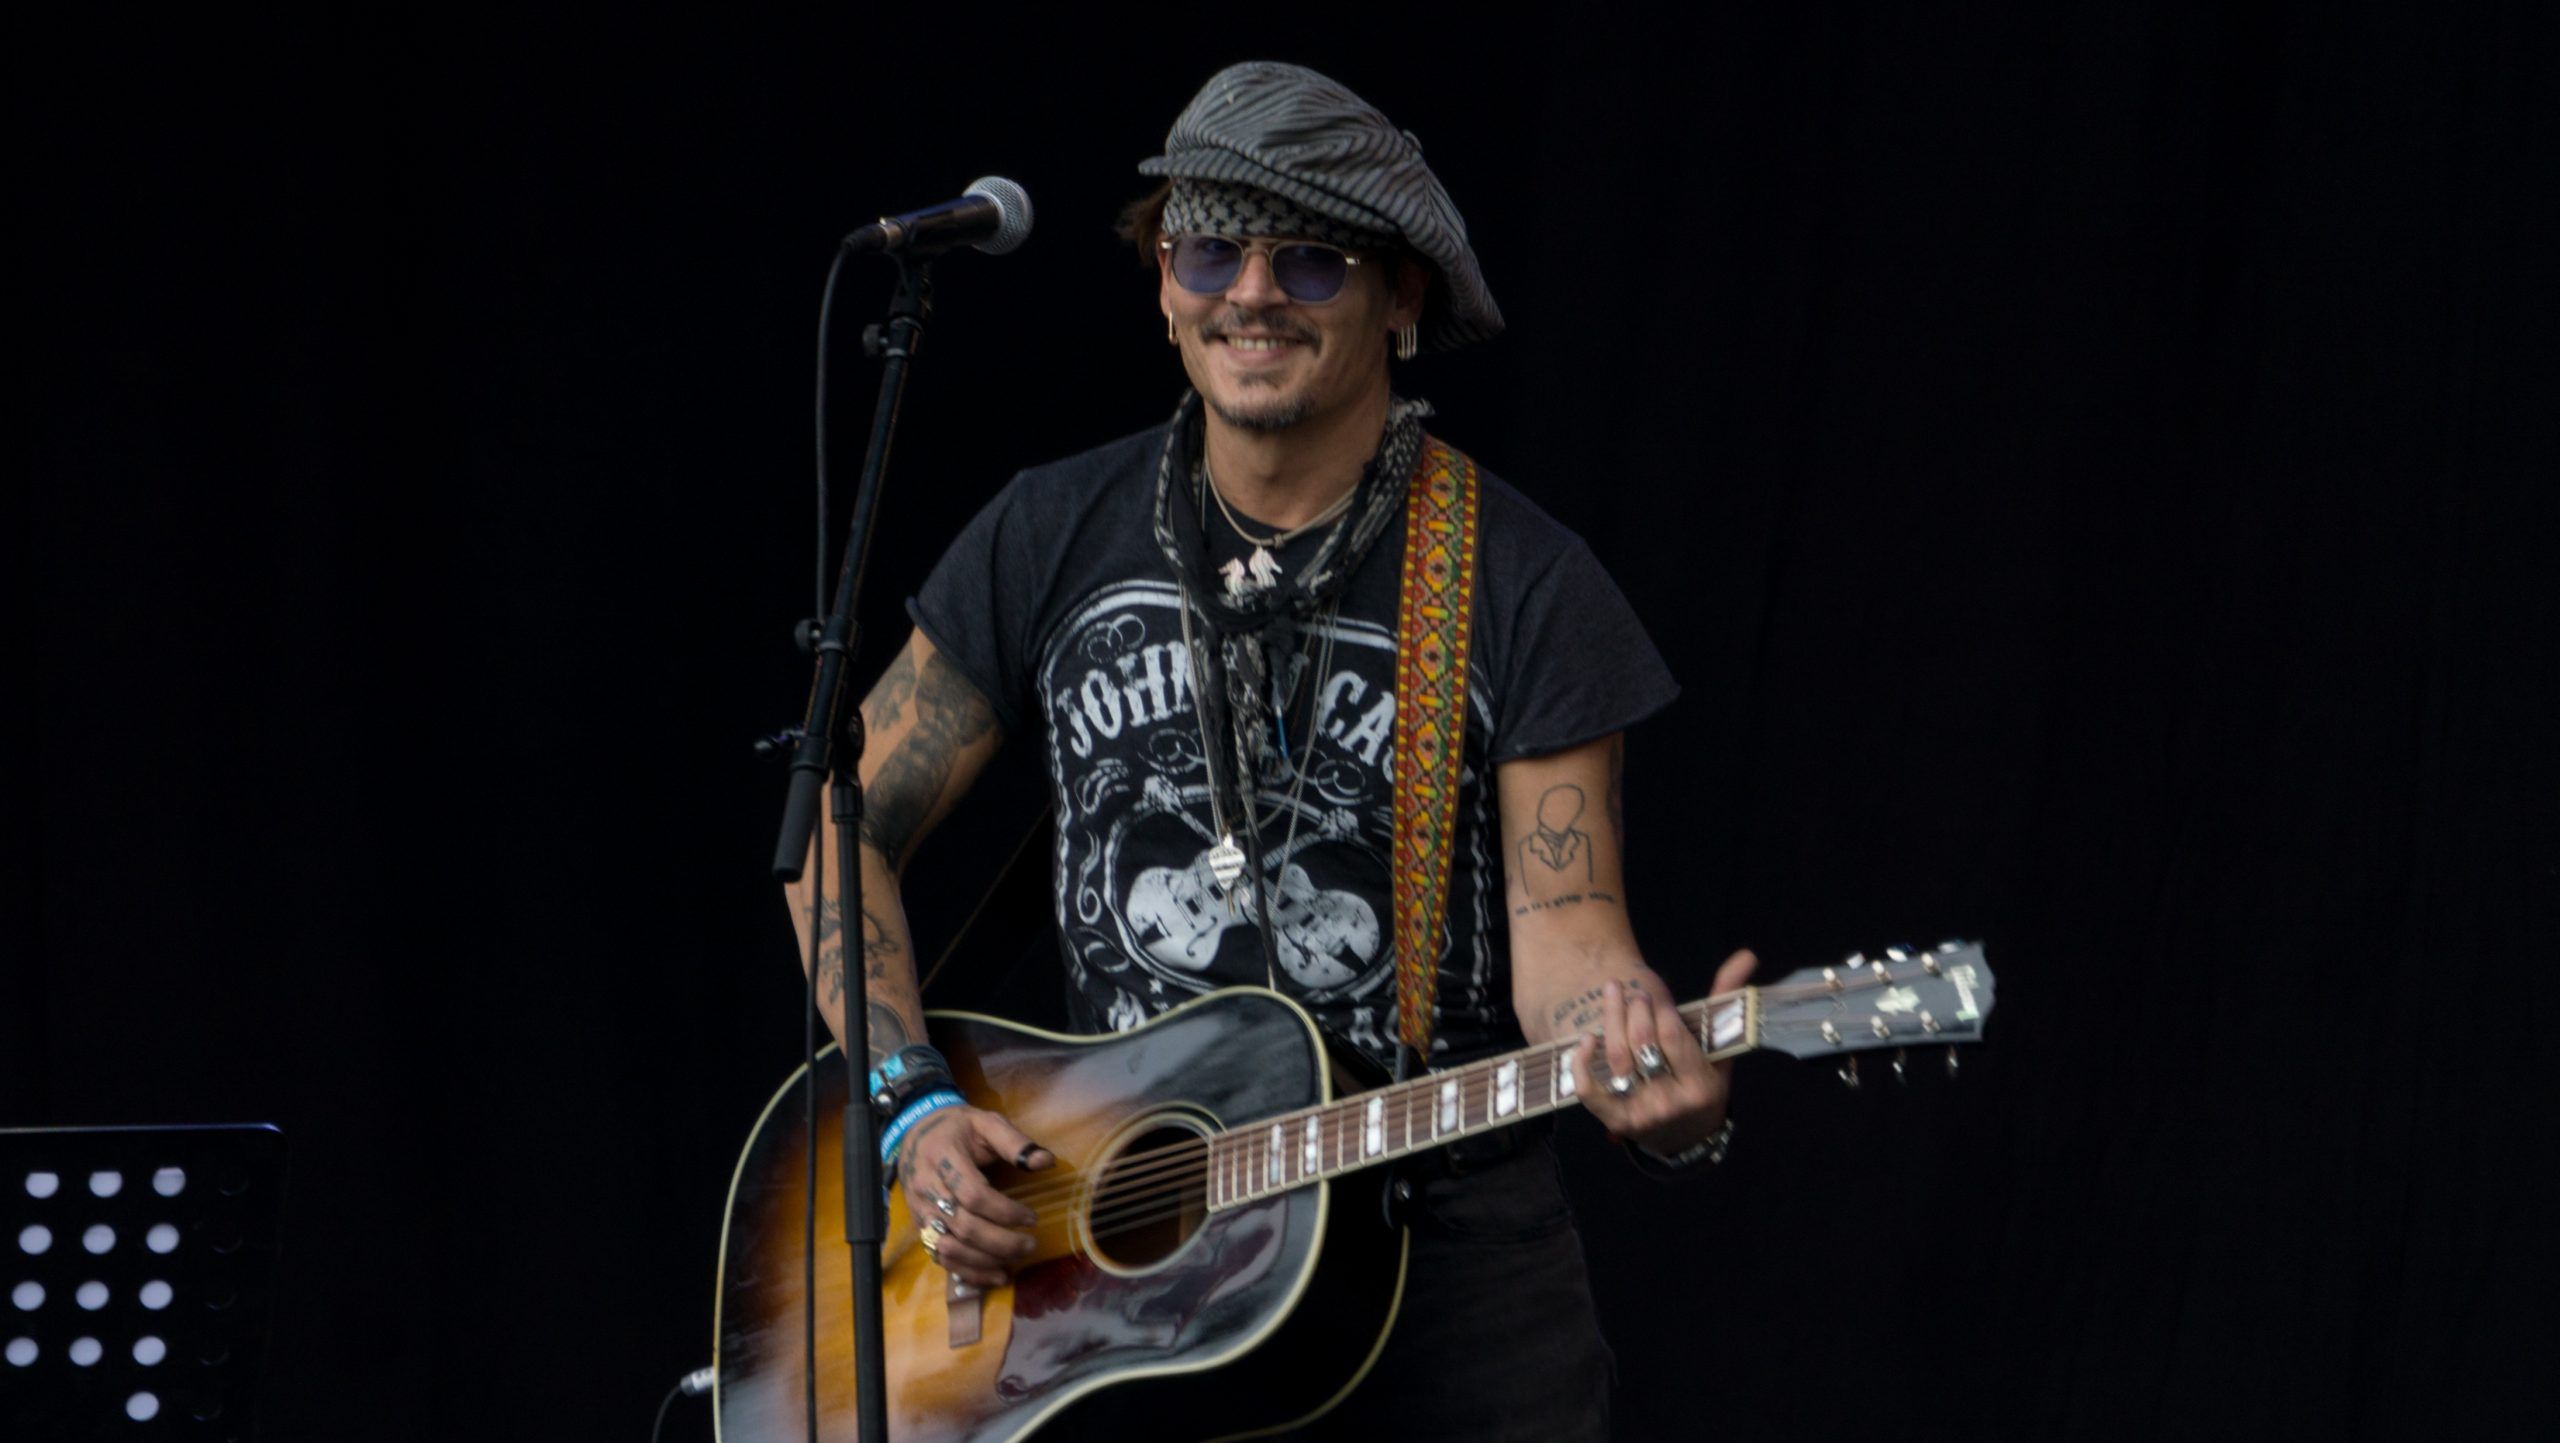 Johnny Depp coming to Denmark in late June